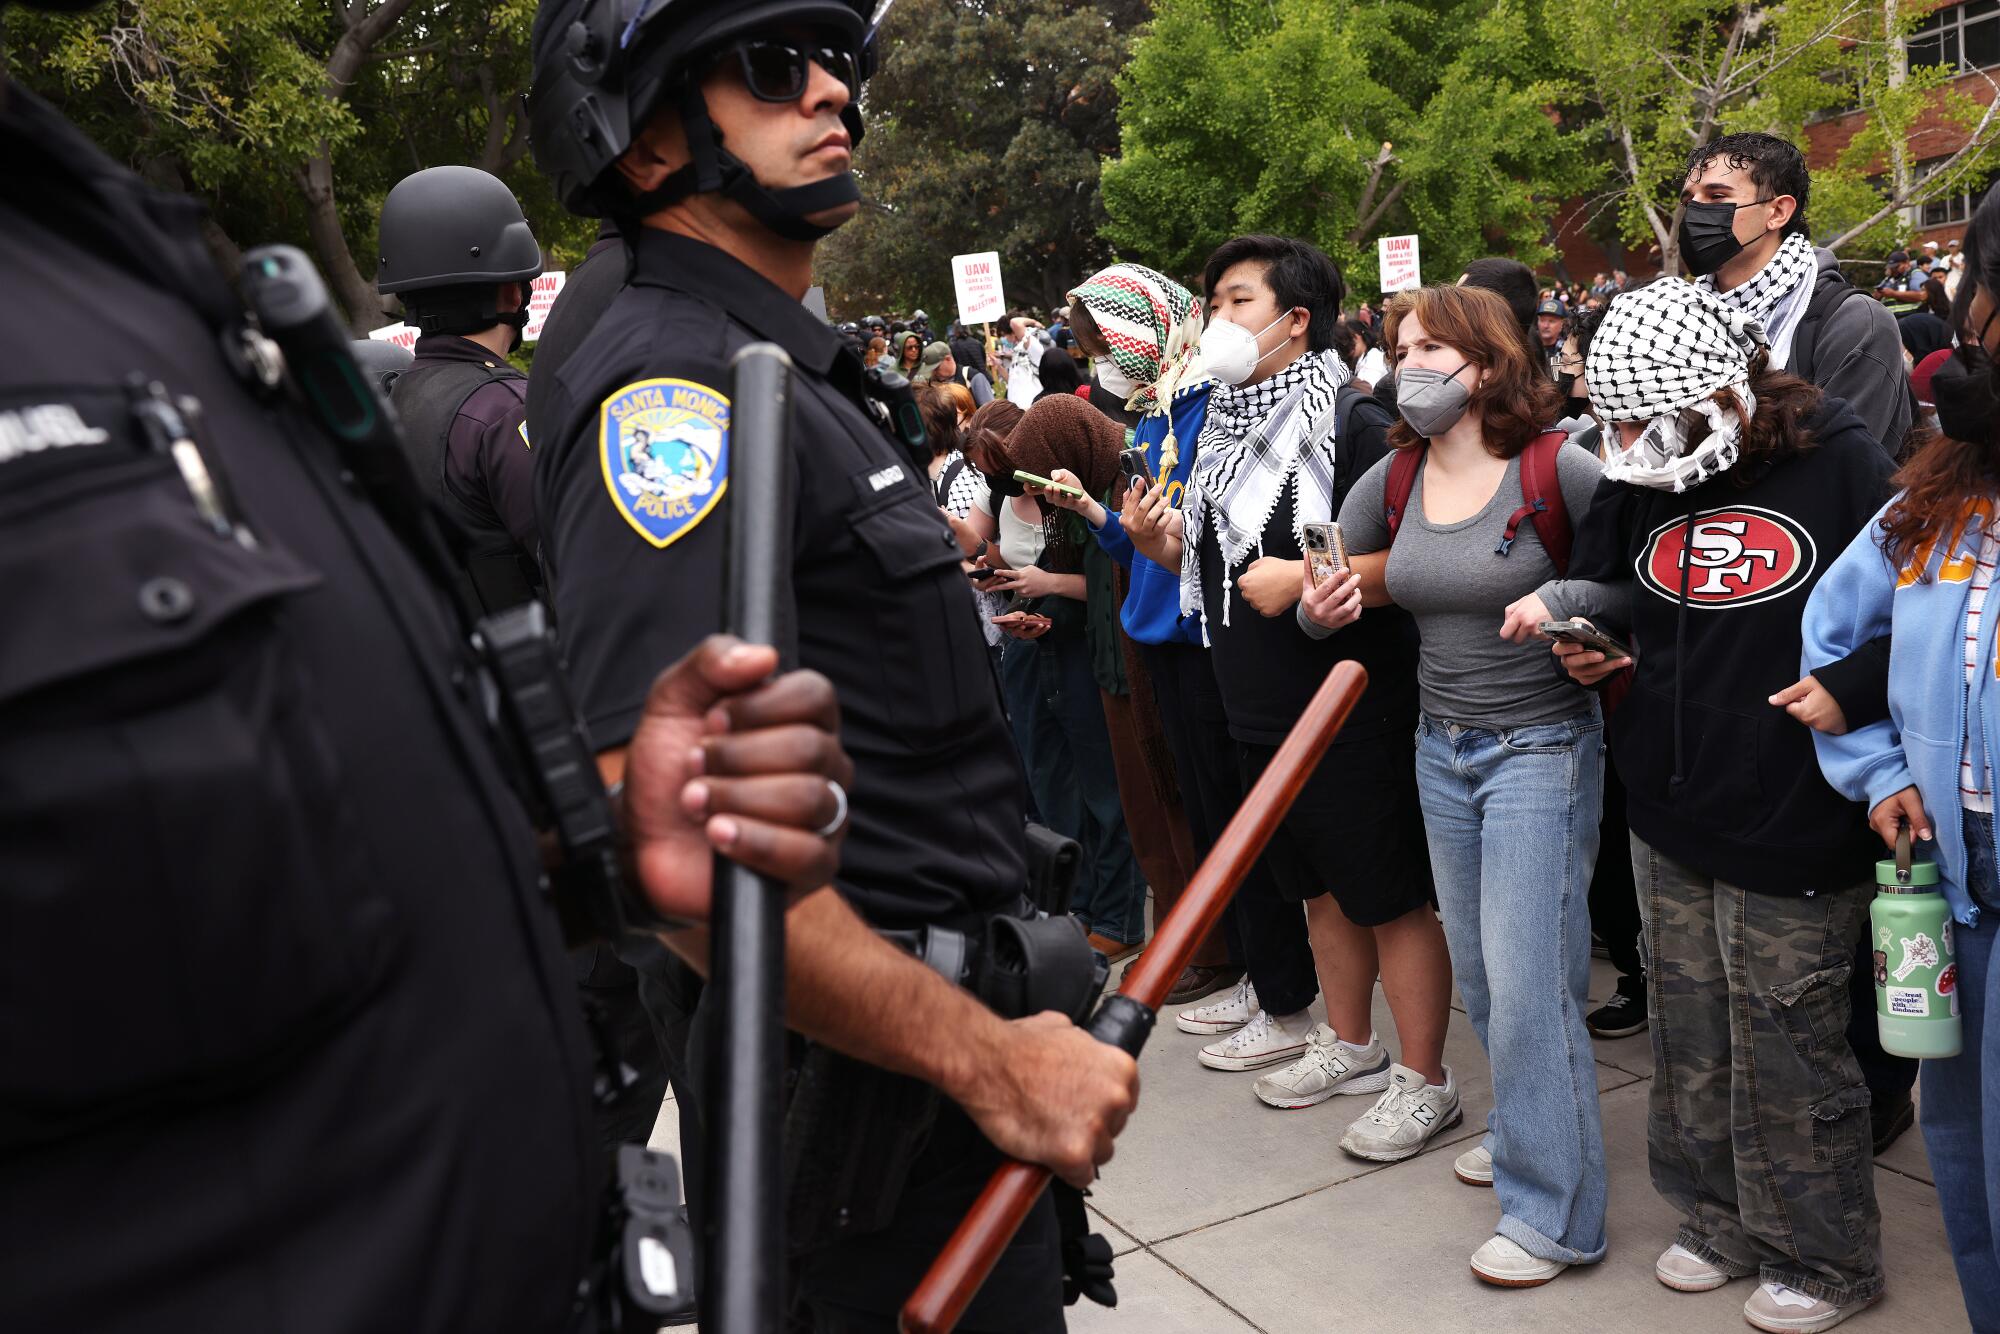 Pro-Palestinian protesters lock arms as police move in to remove a new encampment at UCLA.